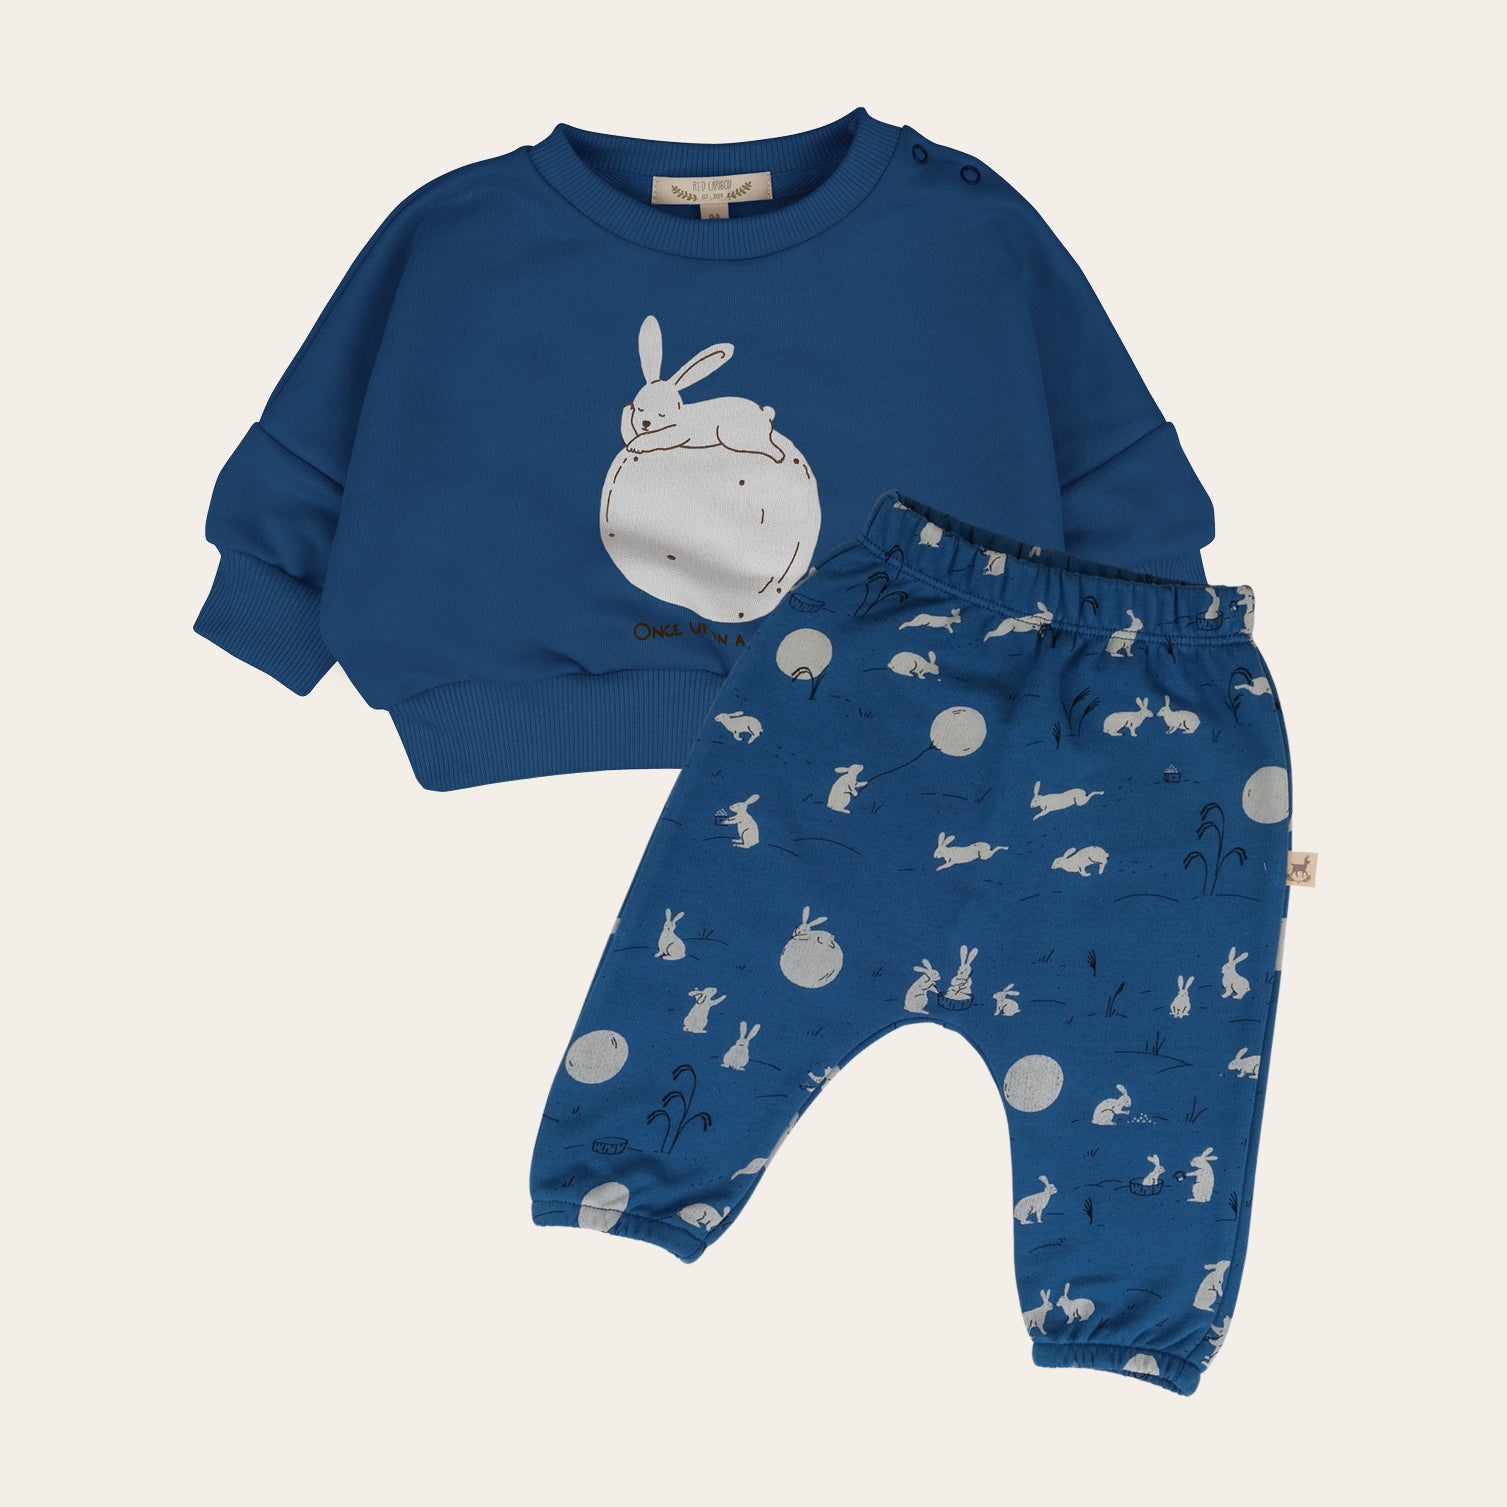 'once upon a moon' dark blue sweatshirt + jogger baby outfit